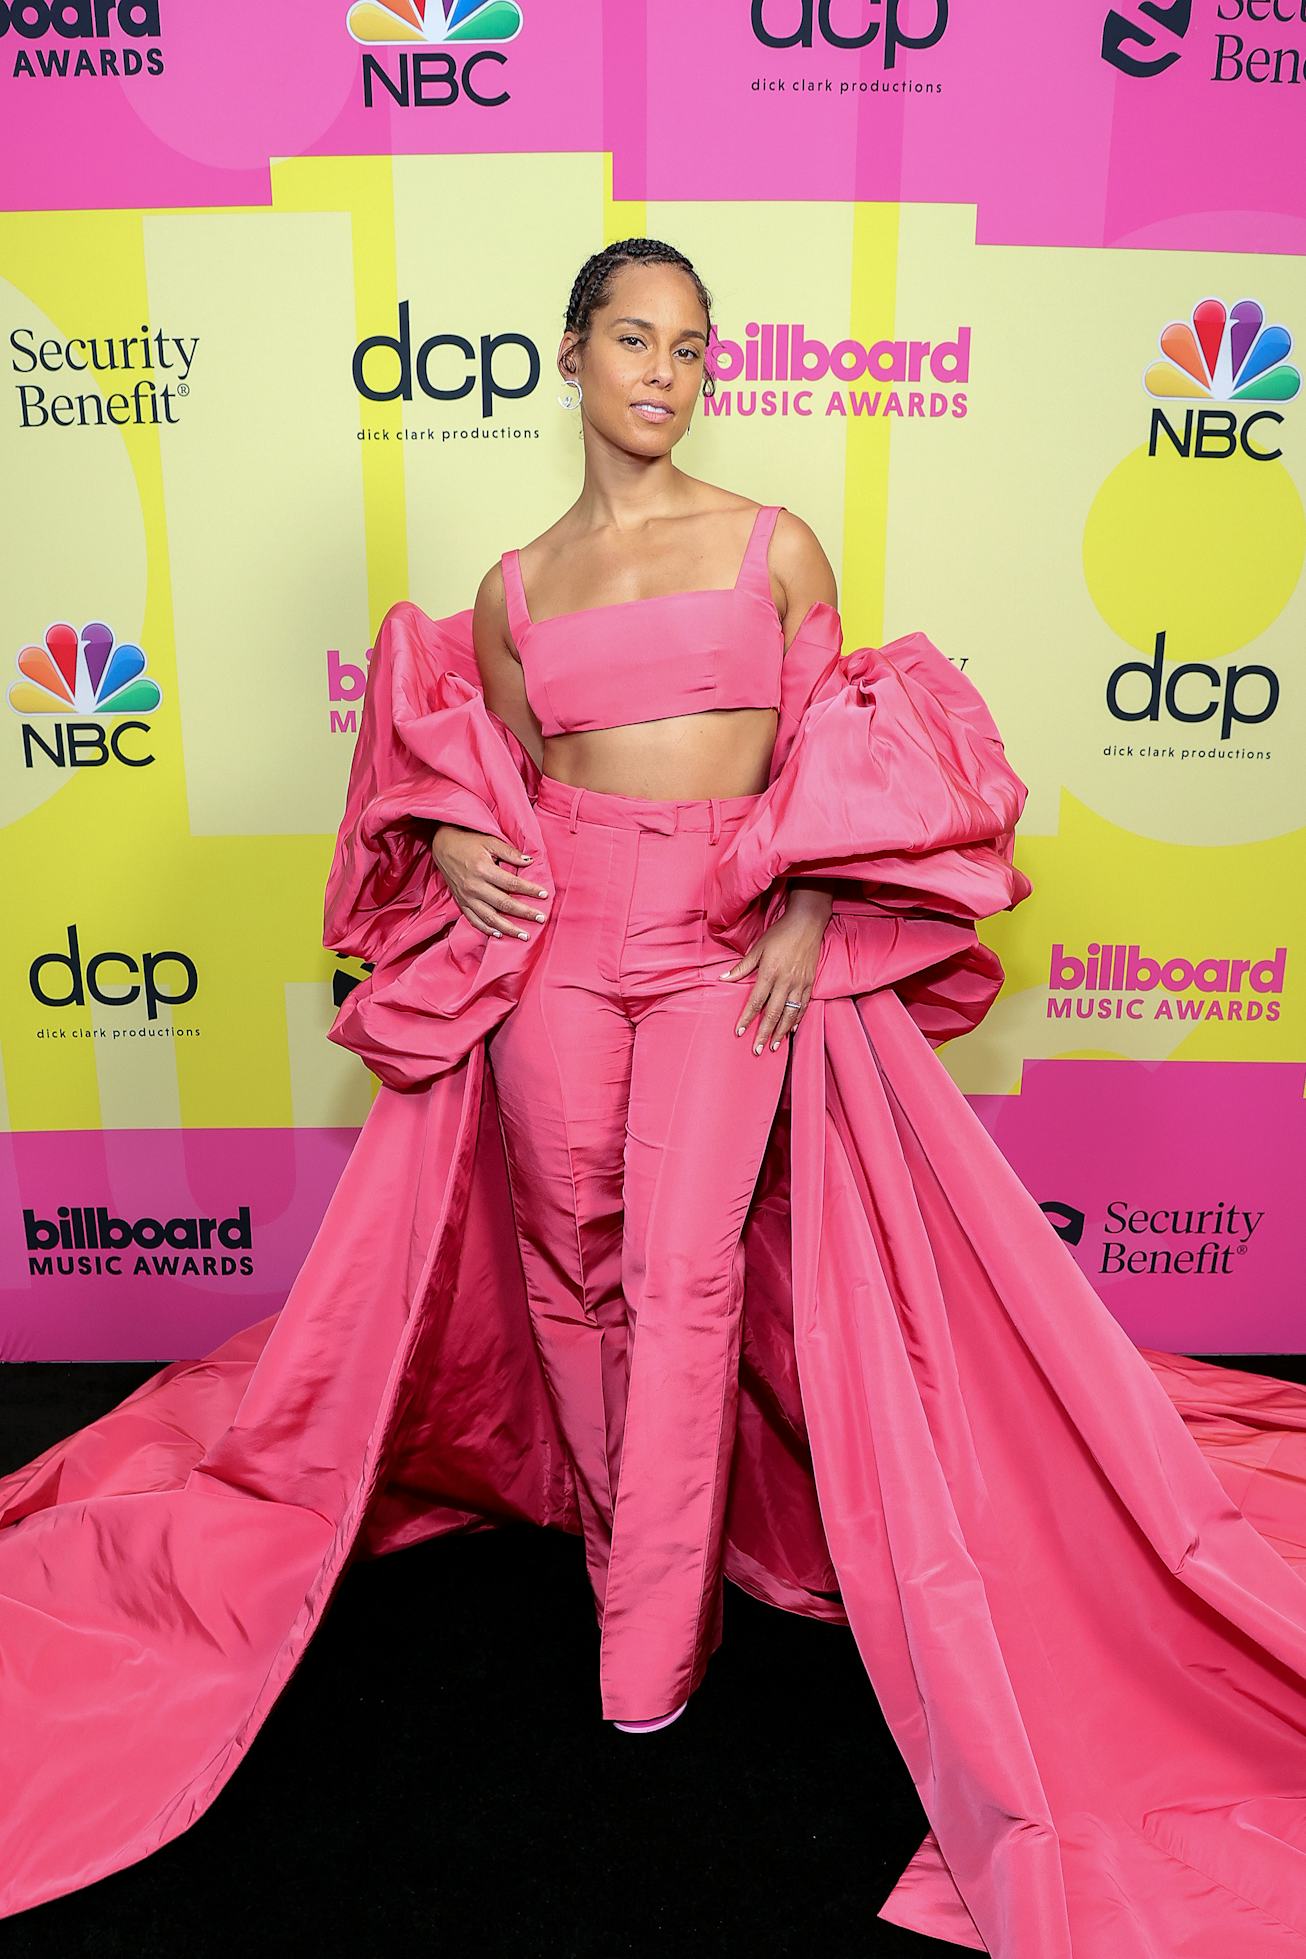 LOS ANGELES, CALIFORNIA - MAY 23: In this image released on May 23, Alicia Keys poses backstage for ...